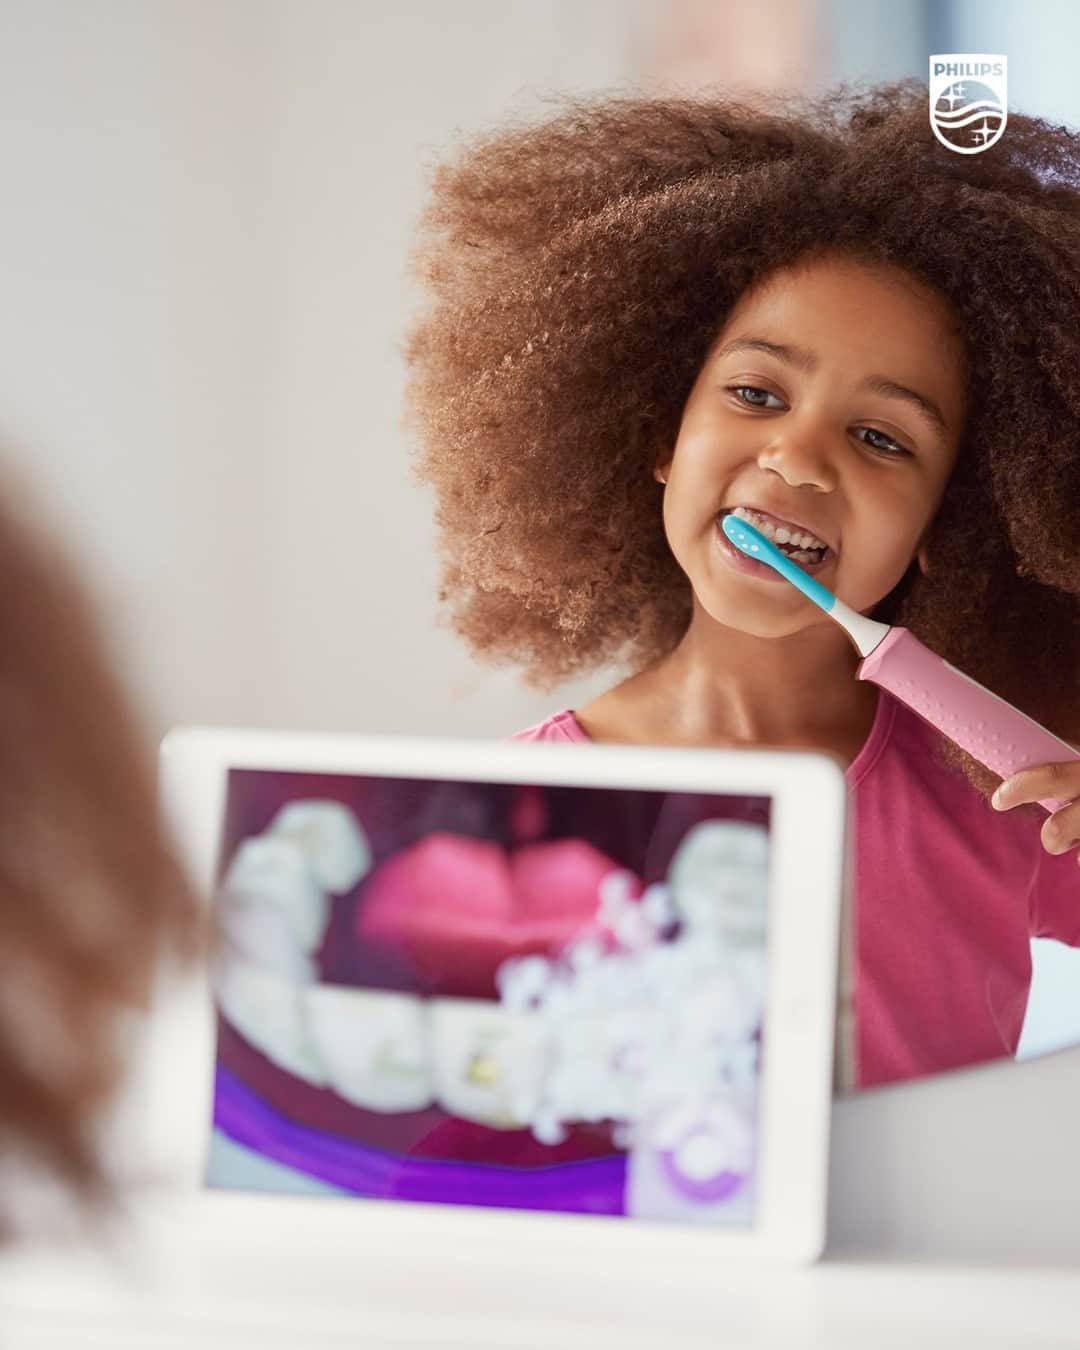 Philips Sonicareのインスタグラム：「More fun, better brushing!   Philips Sonicare for Kids has a Bluetooth-enabled app that keeps kids engaged while they learn how to brush better, building lifelong habits. 😁  #PhilipsSonicare #HealthyHabits」